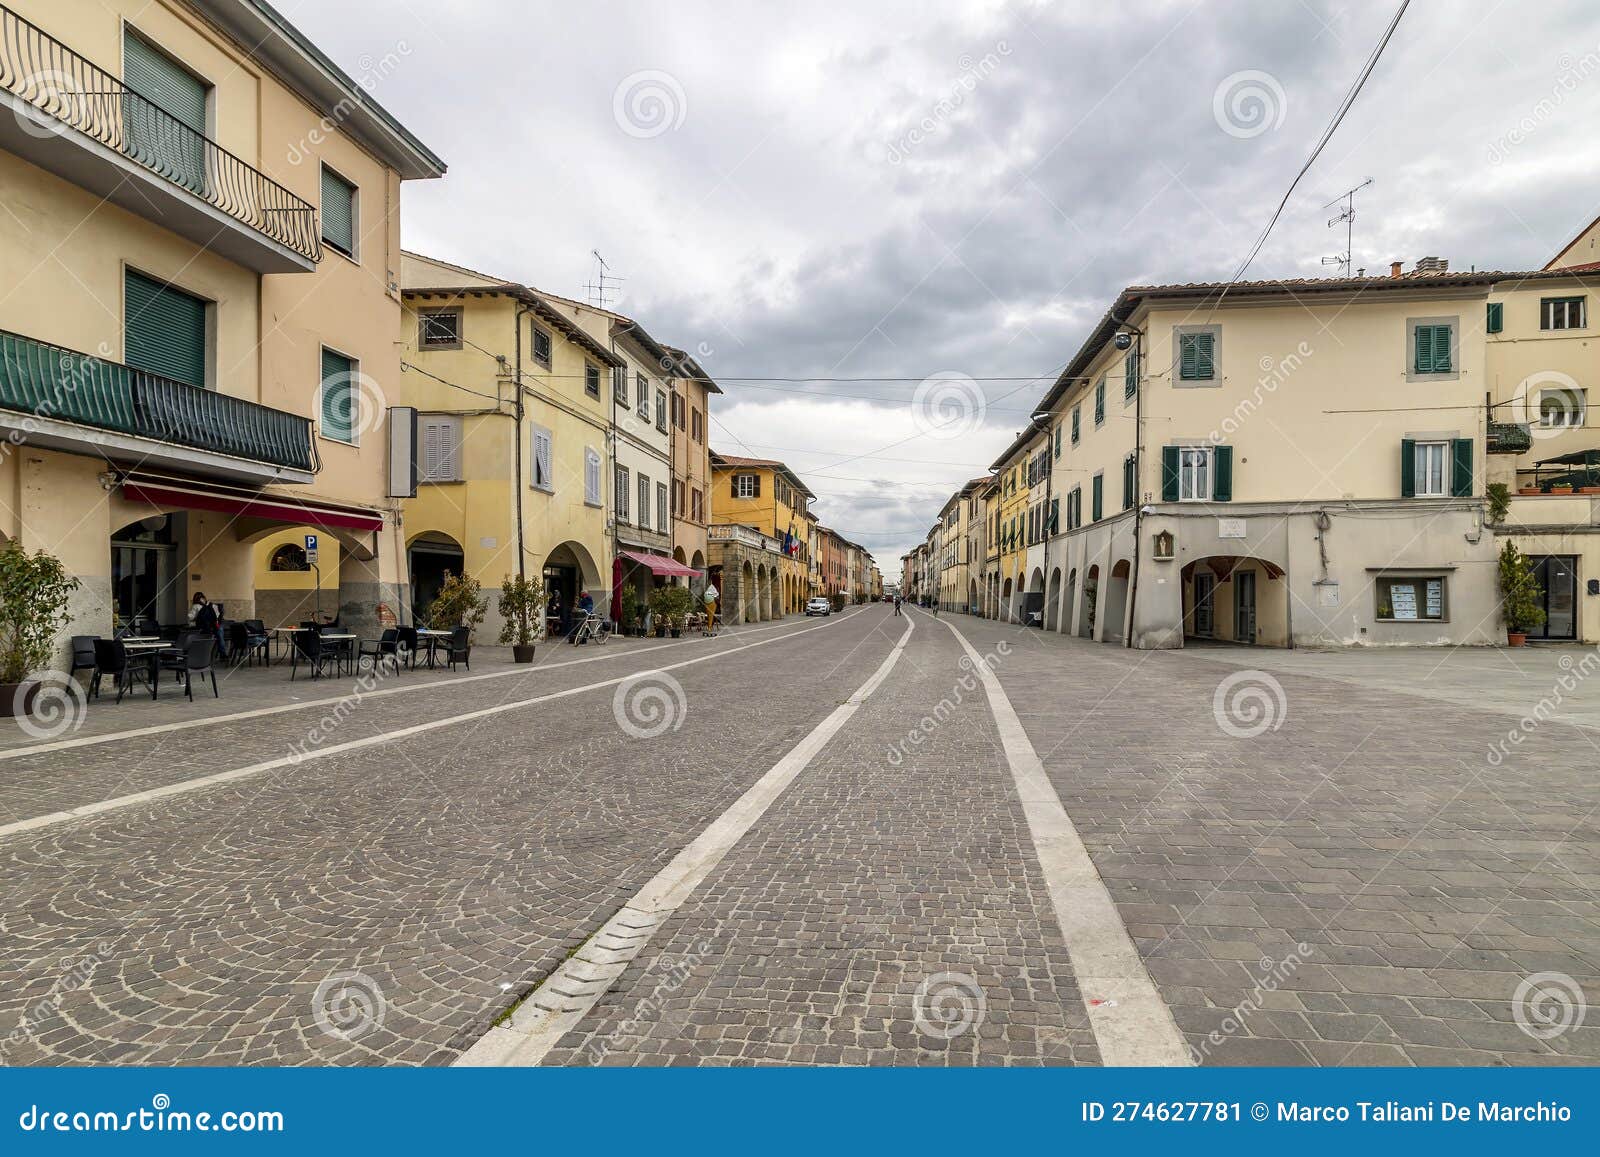 the very central corso giacomo matteotti in a moment of tranquillity, cascina, pisa, italy